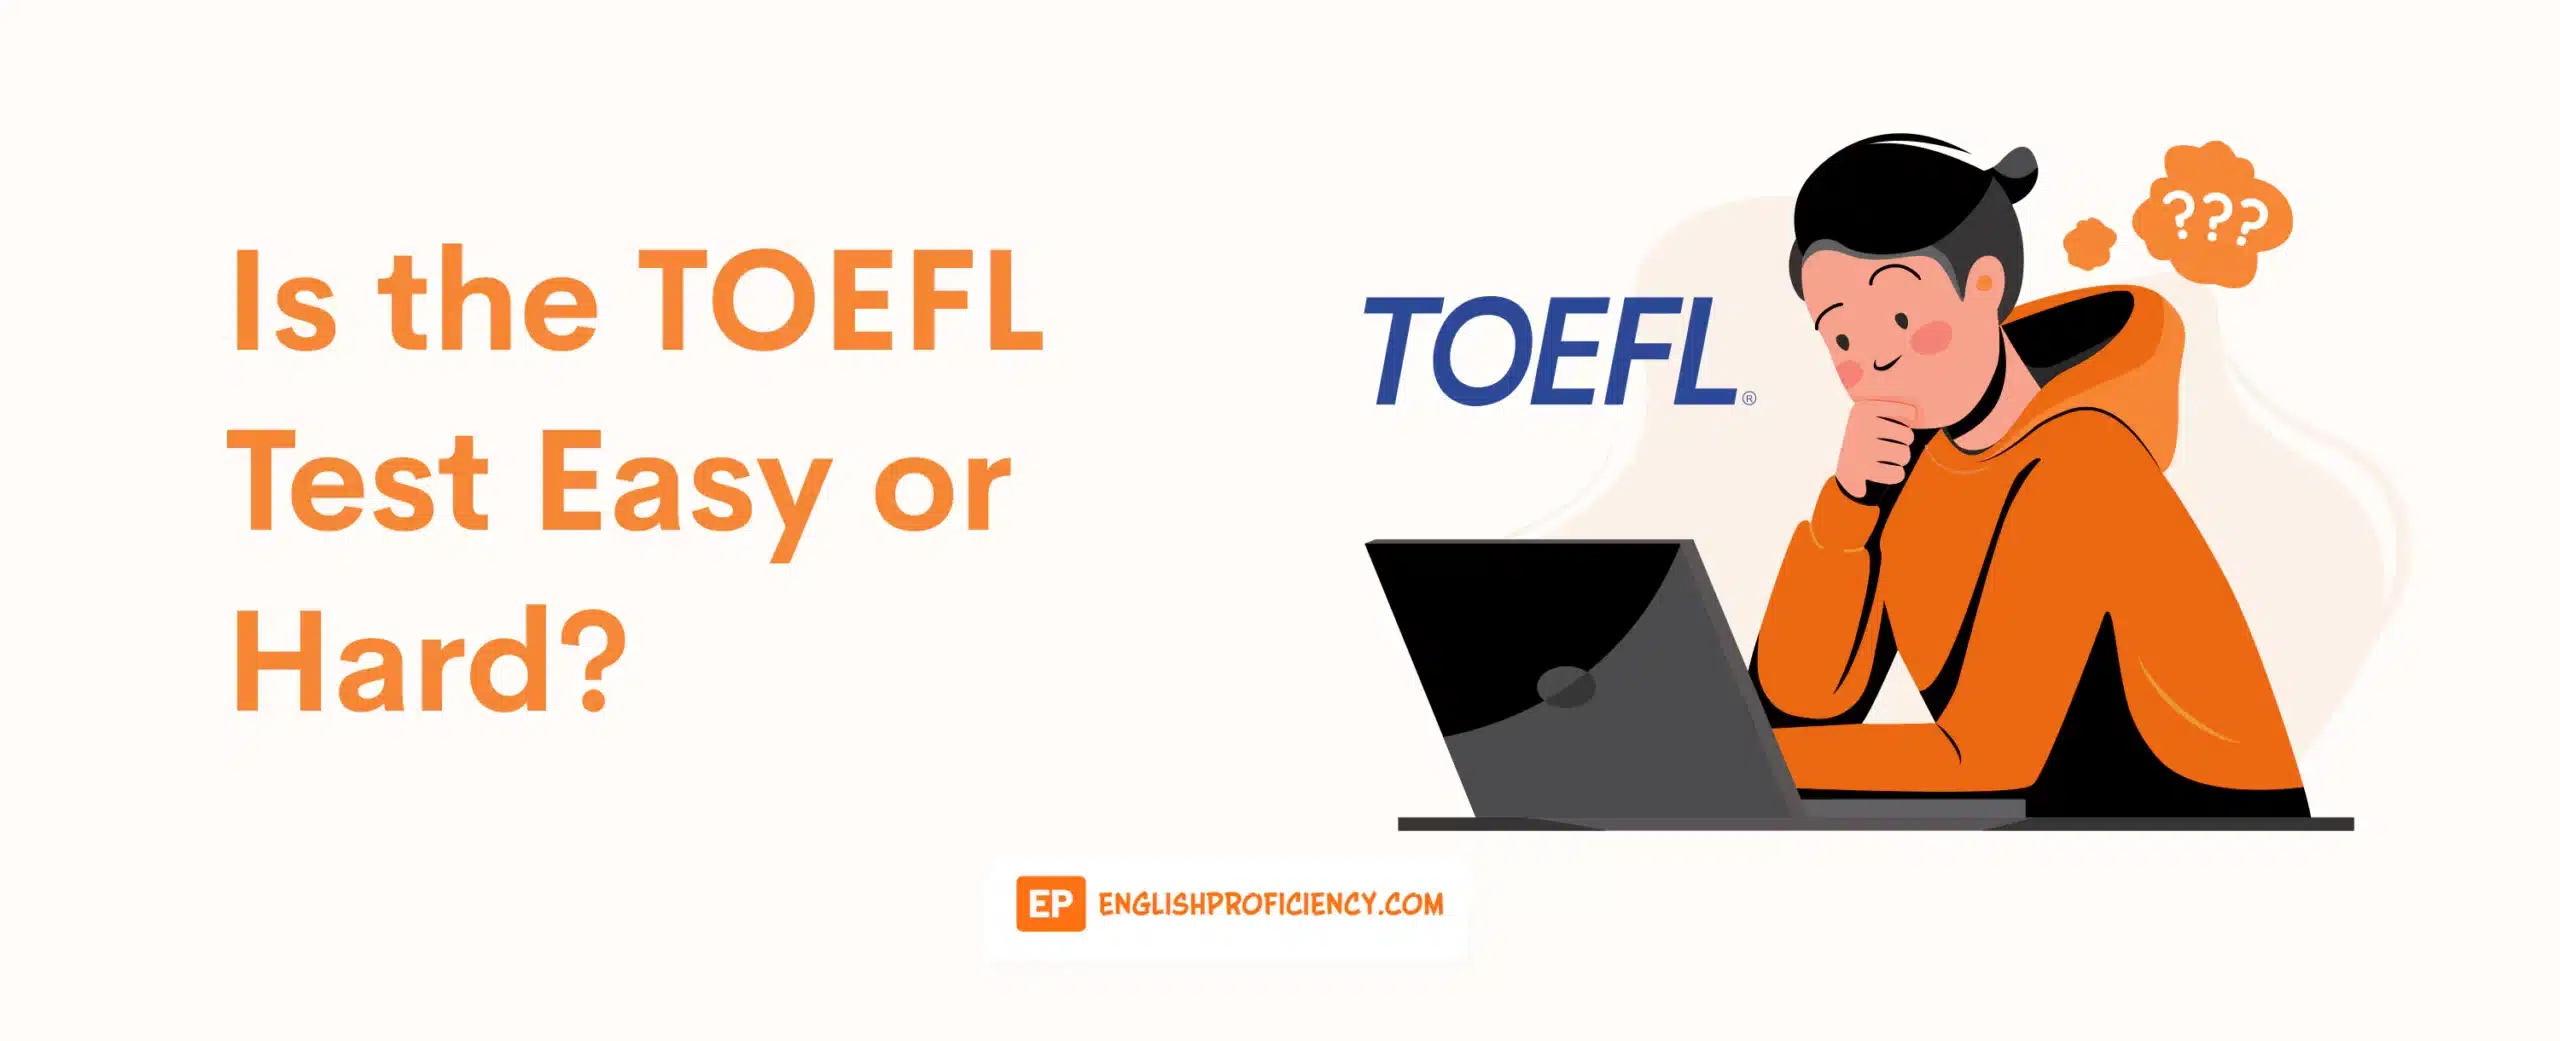 Is the TOEFL Test Easy or Hard